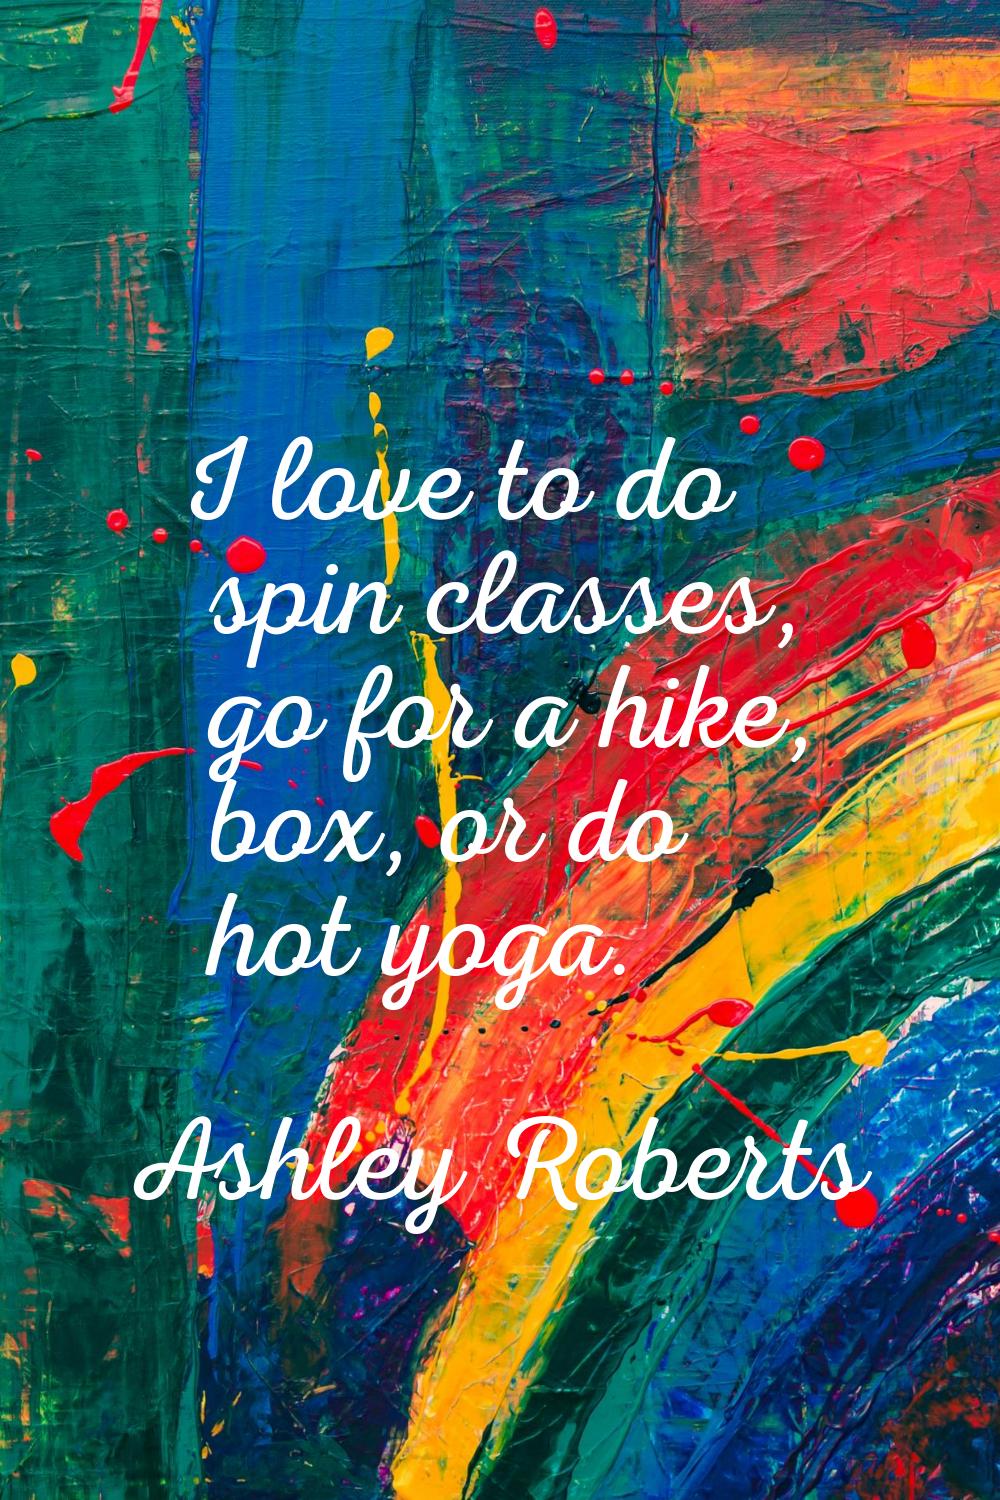 I love to do spin classes, go for a hike, box, or do hot yoga.